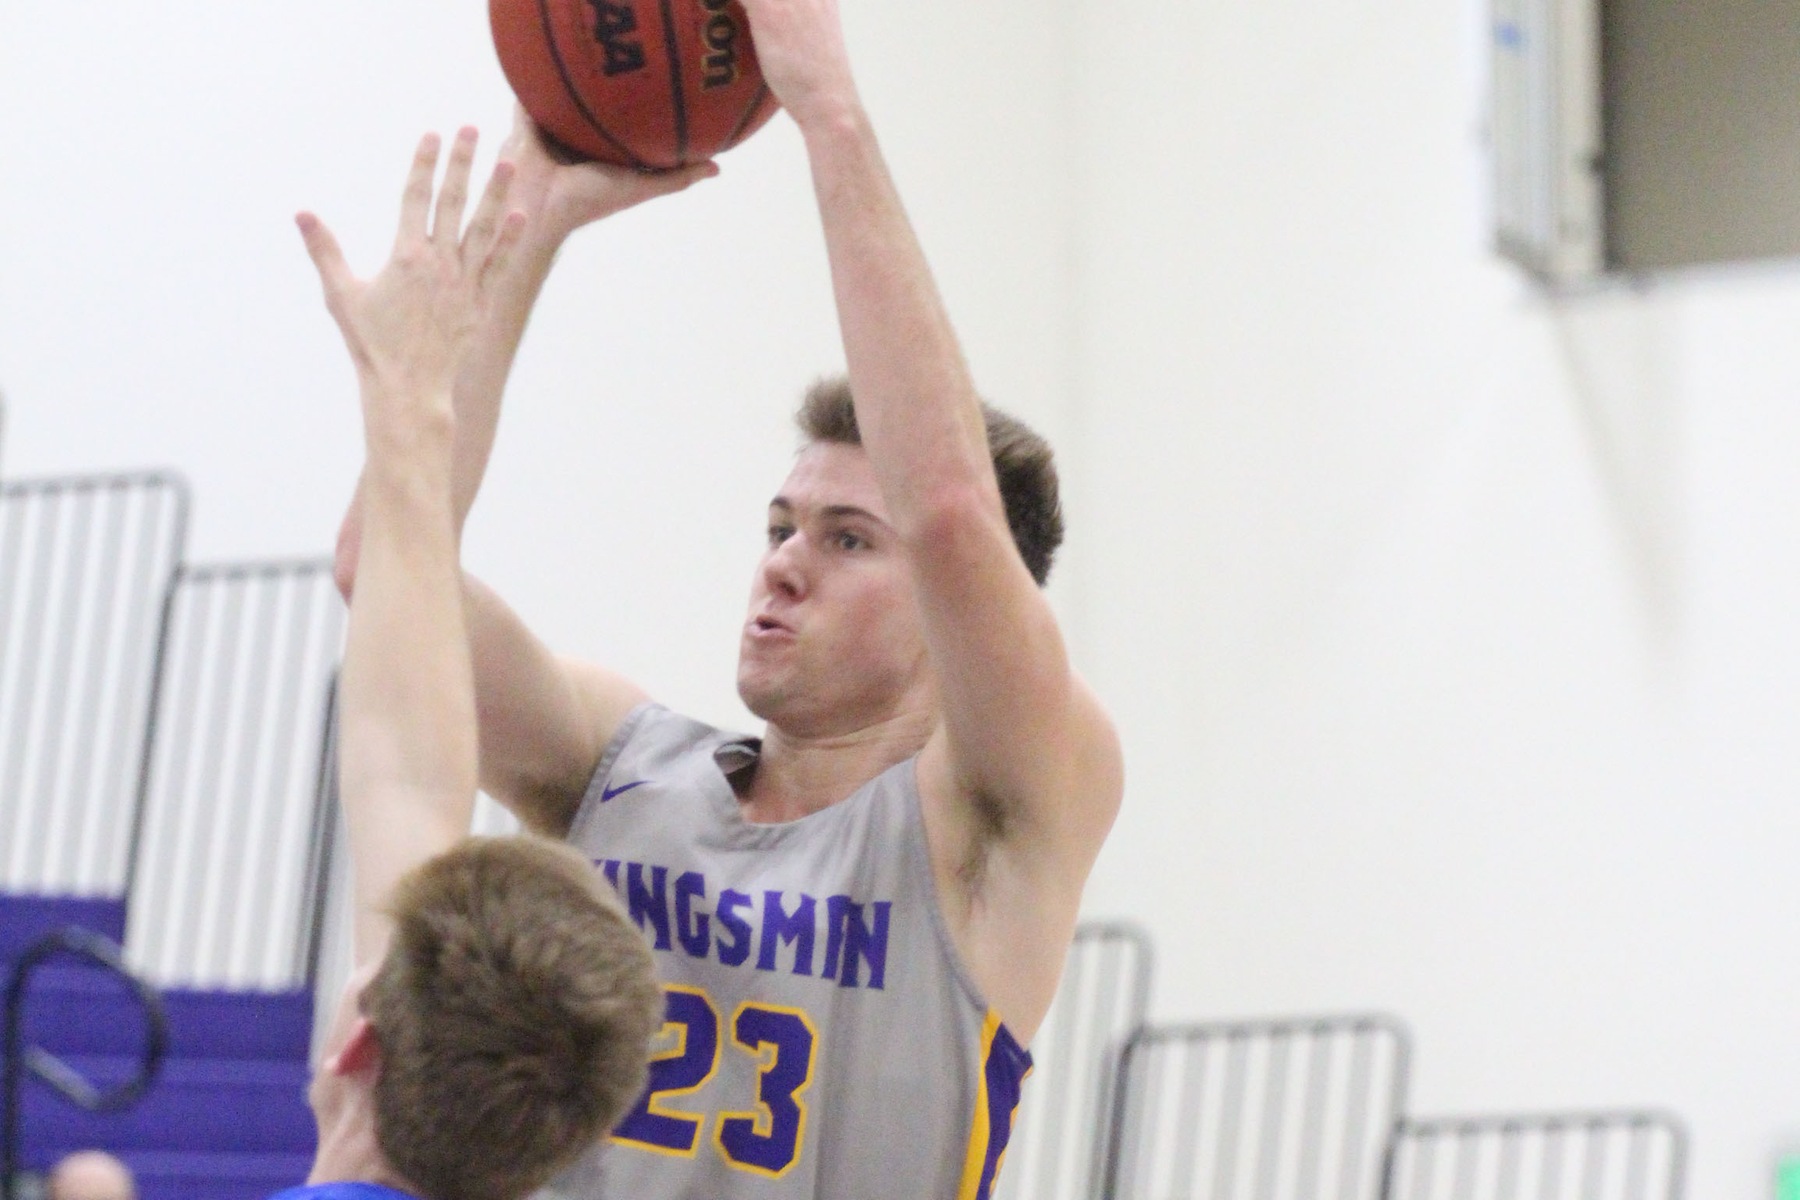 Austin Cole led the offense with 21 points against the Sagehens. (Photo: Danielle Roumbos)